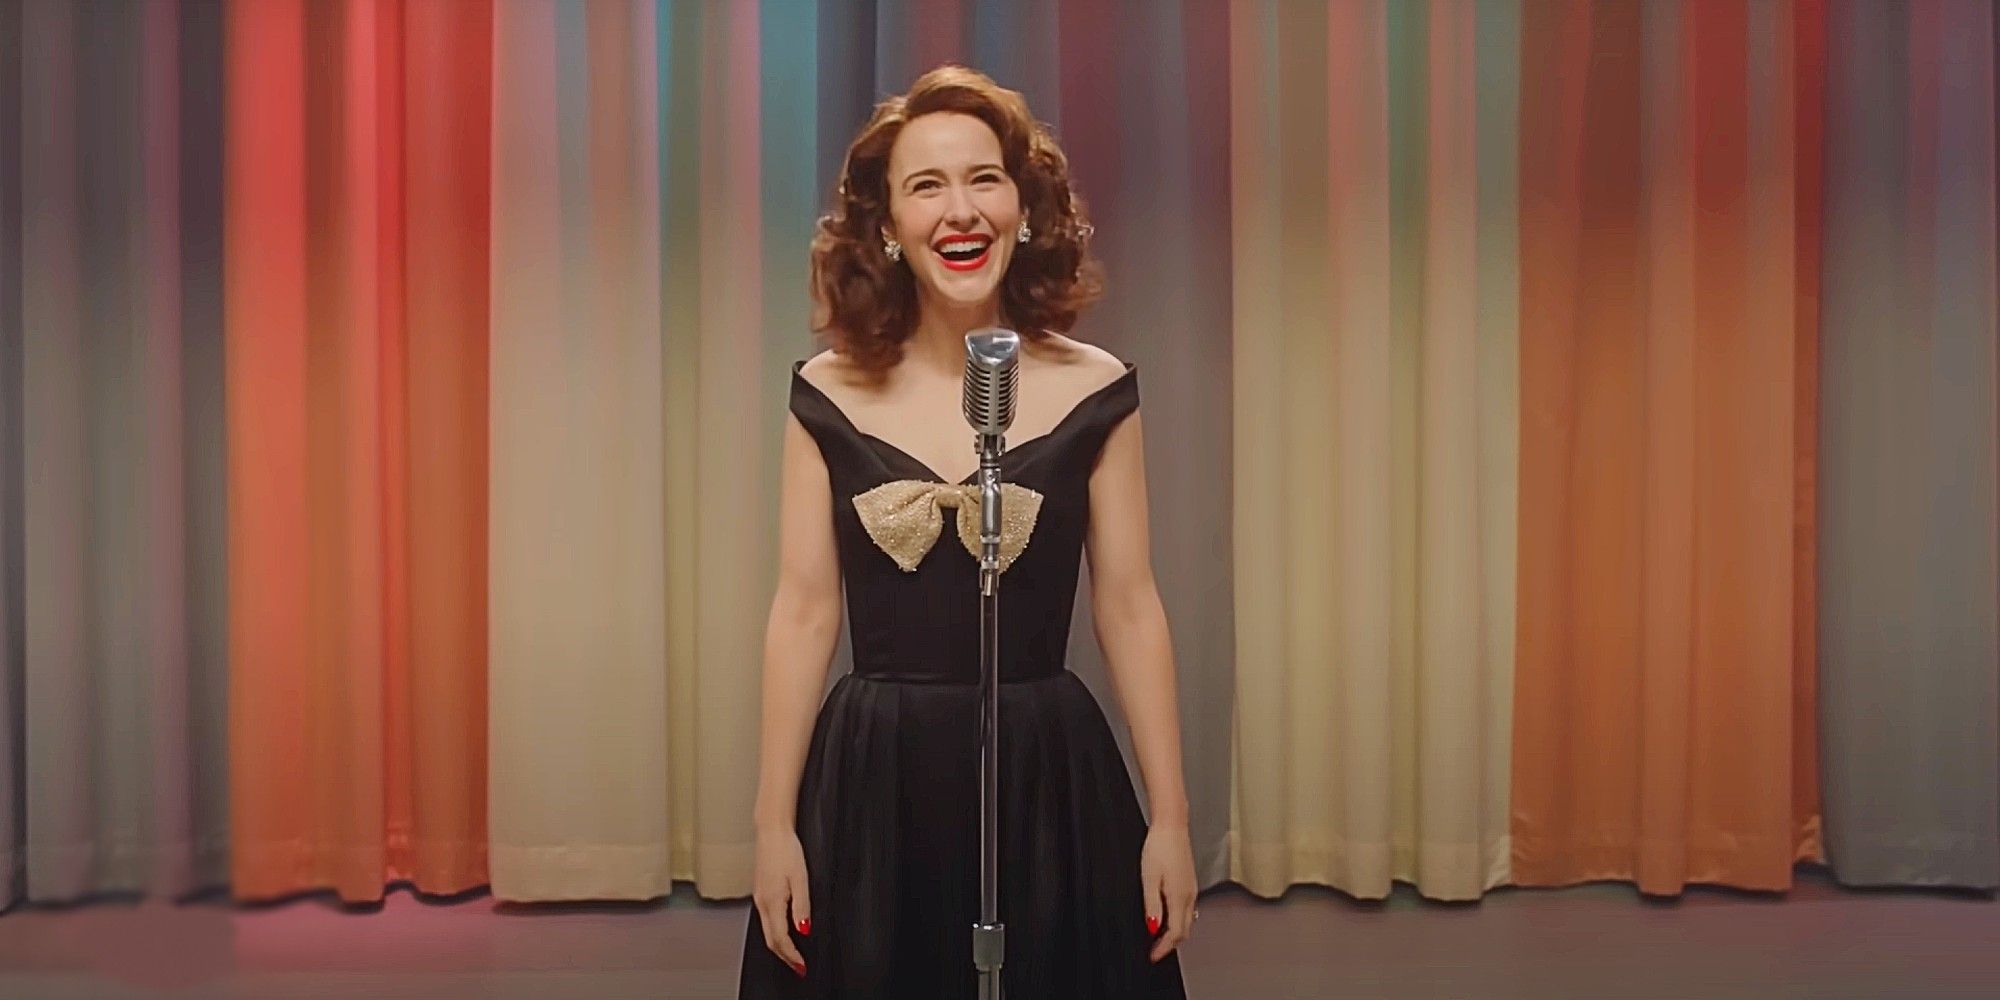 Midge Maisel performing on The Gordon Ford show in The Marvelous Mrs. Maisel